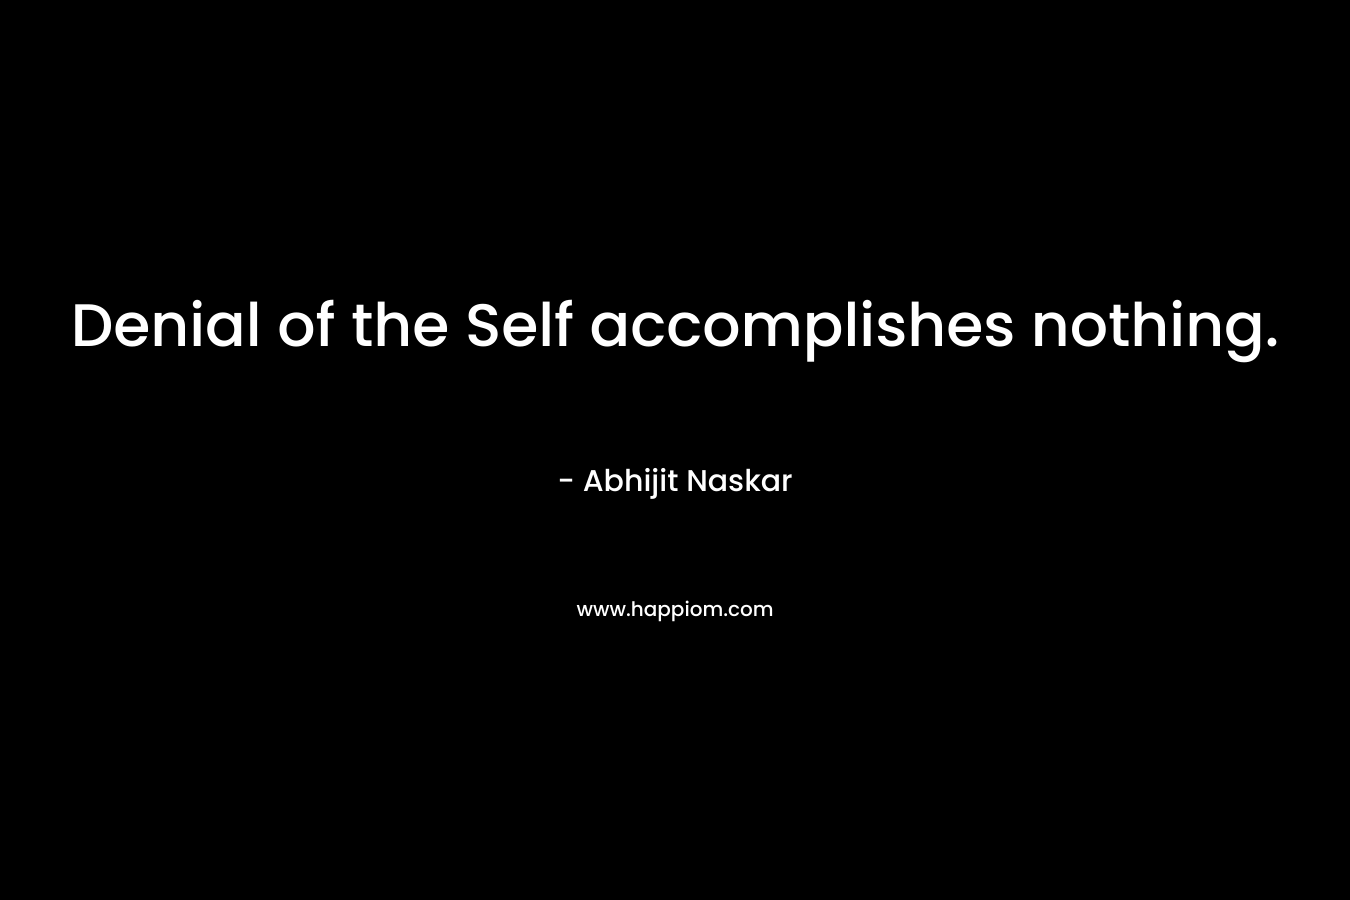 Denial of the Self accomplishes nothing.